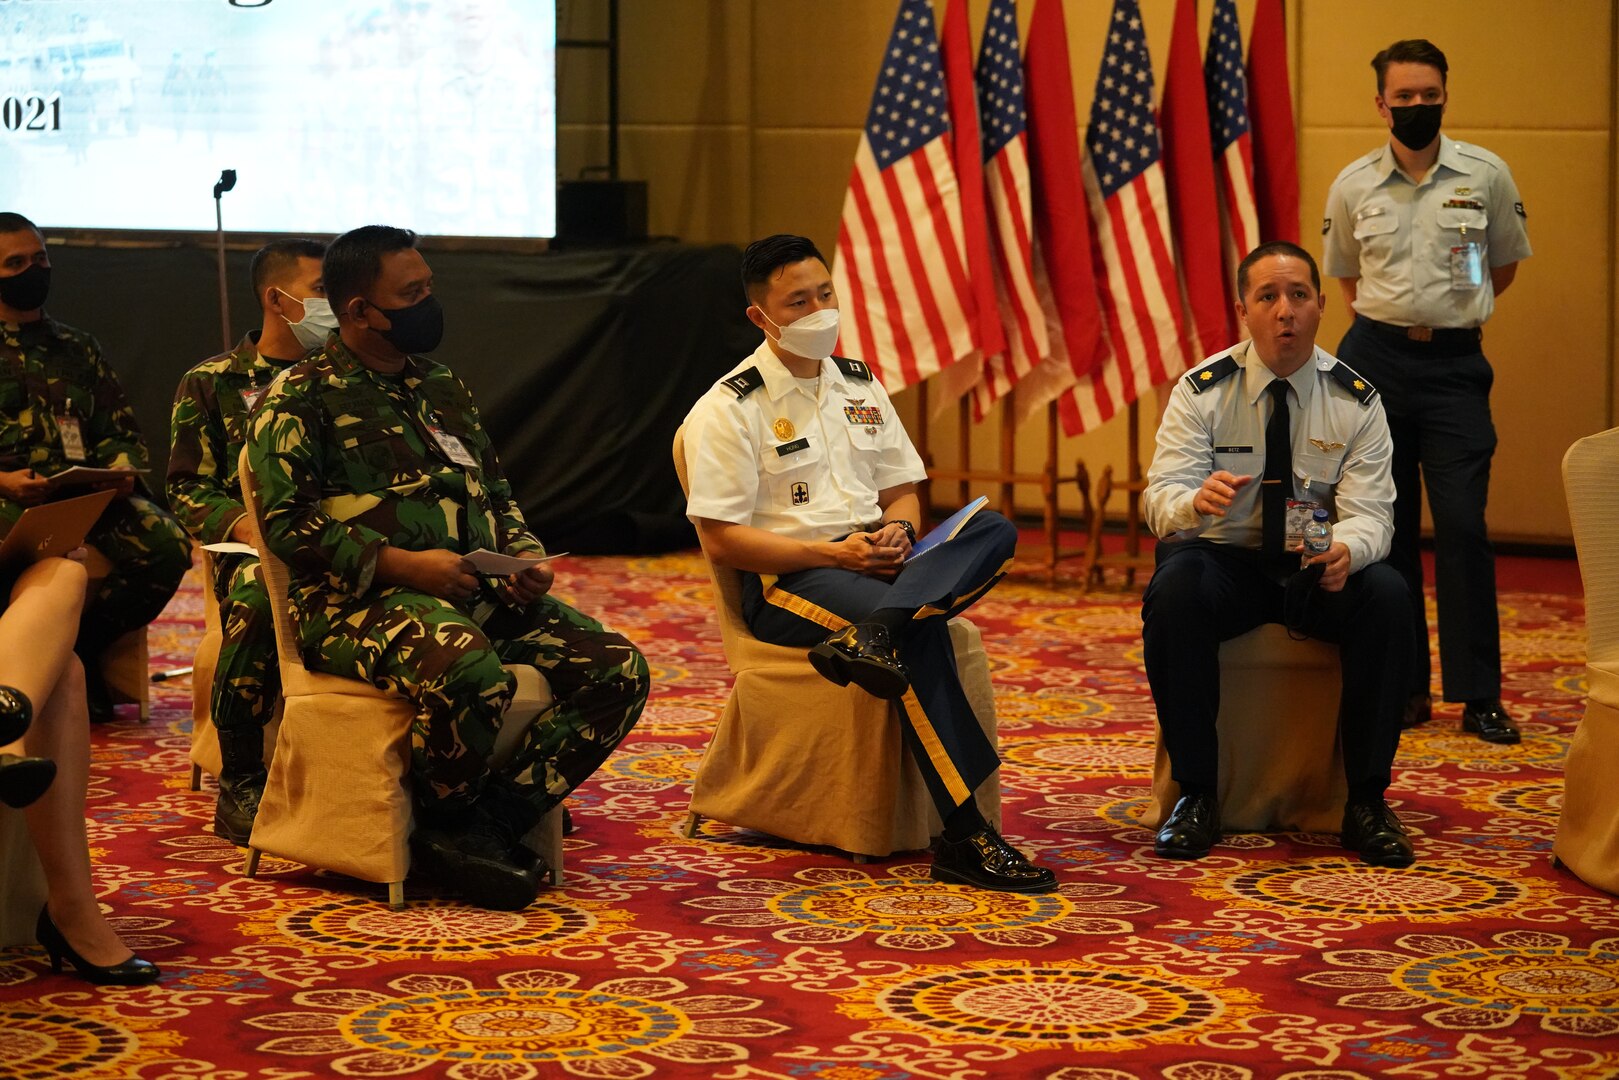 Maj. Derek Betz, Air National Guard, discusses the airspace management portion of Joint Exercise GEMA BHAKTI with the exercise joint staff comprised of members of the Tentara Nasional Indonesia, U.S. Army, Navy, Marines and the Hawaii National Guard, Sept. 23, 2021, Jakarta Indonesia. GB21 is a Chairman, Joint Chiefs of Staff staff exercise between USINDOPACOM and TNI to improve joint, operational staff planning and processes.